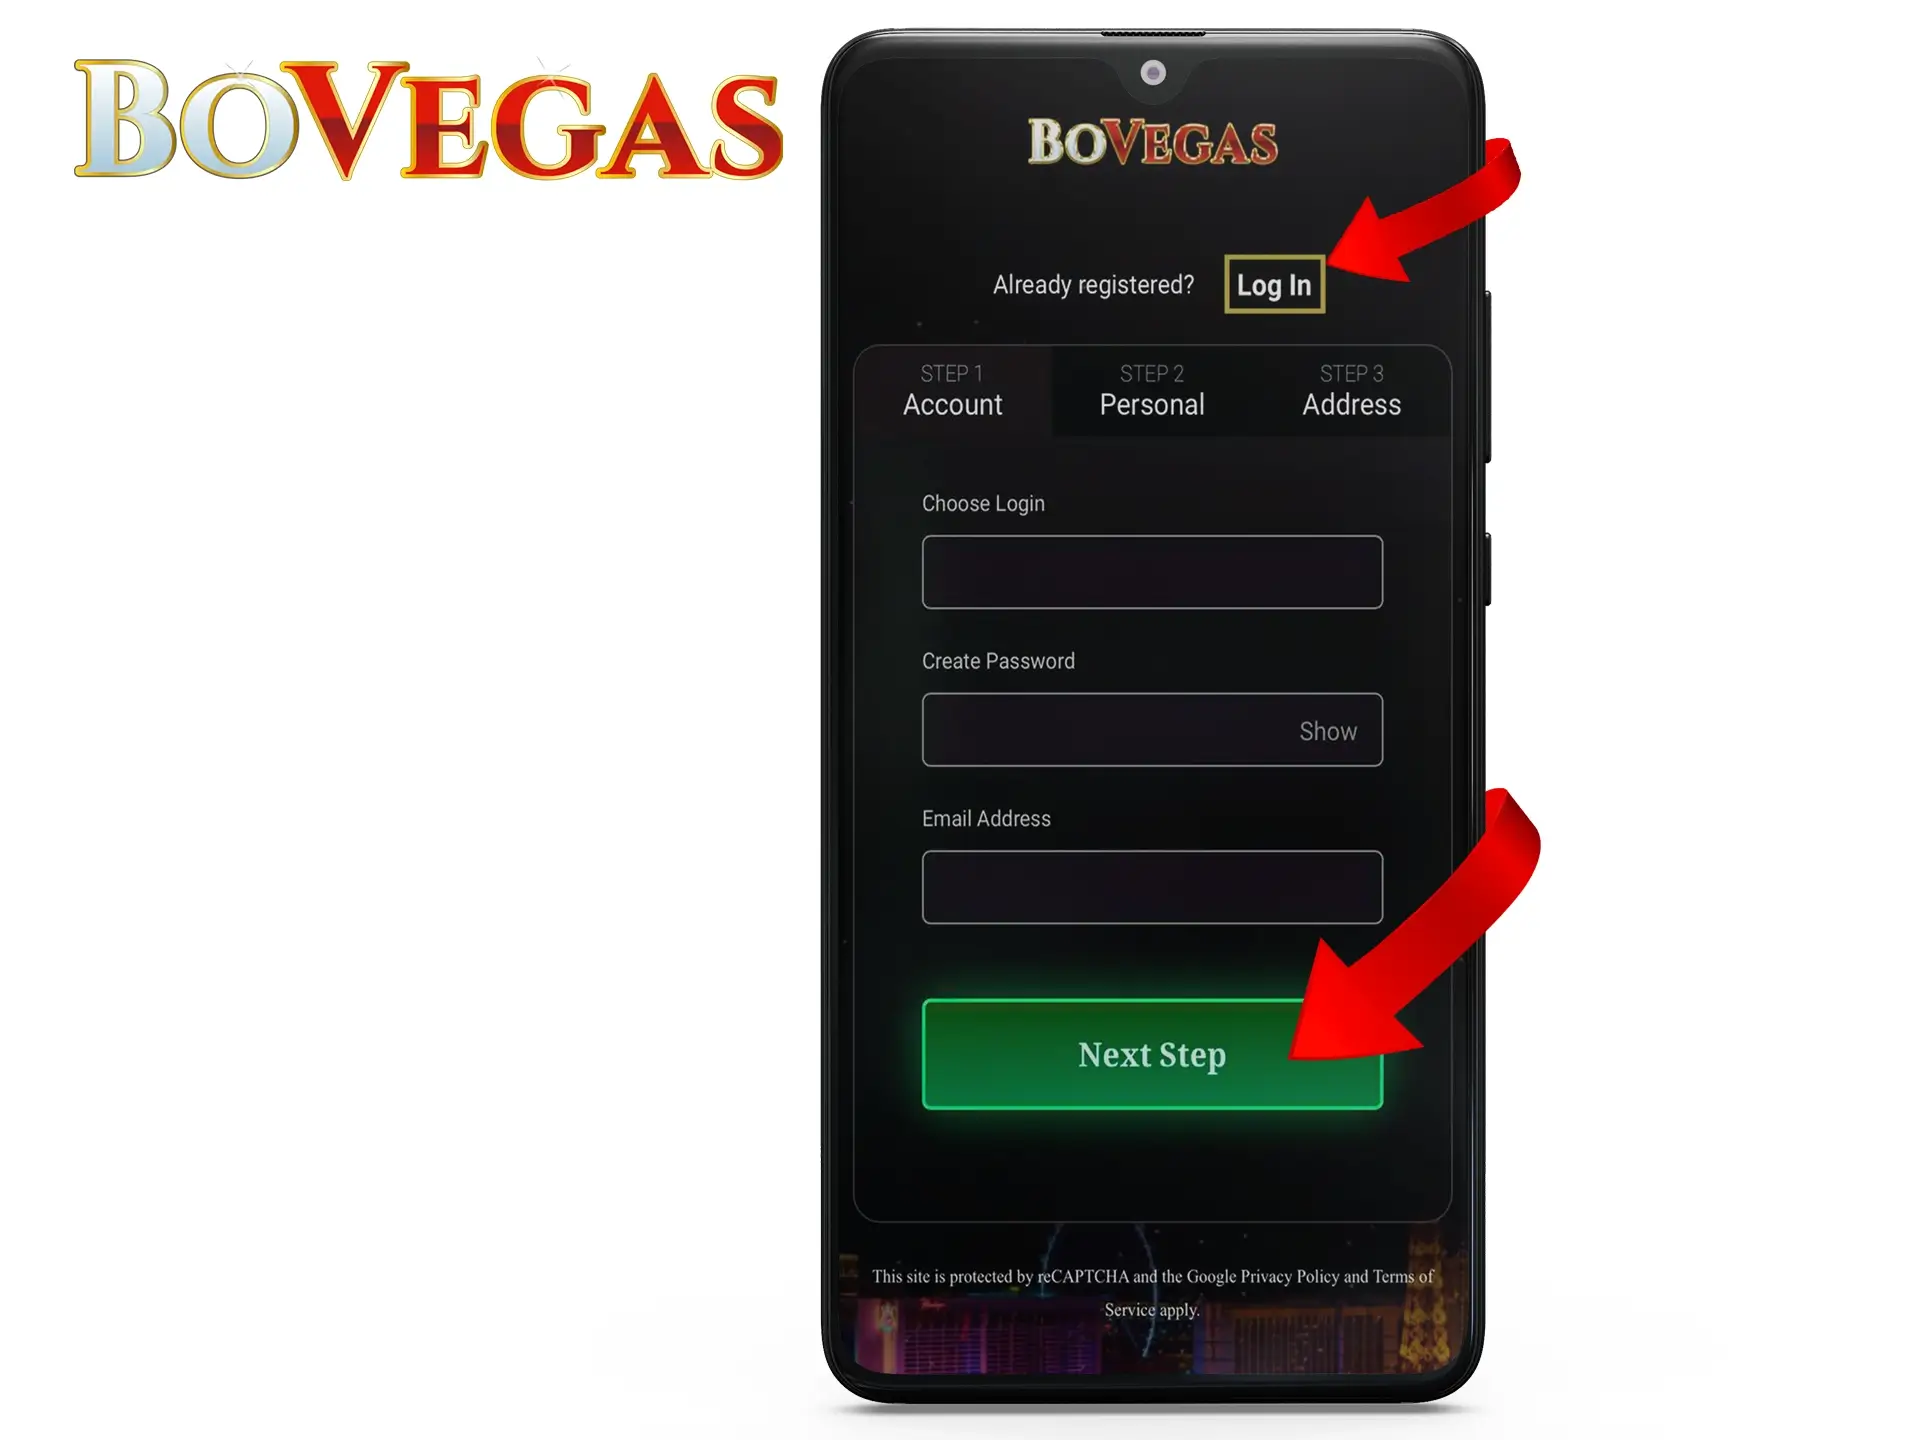 Register or log in at BoVegas mobile version on any Android device.